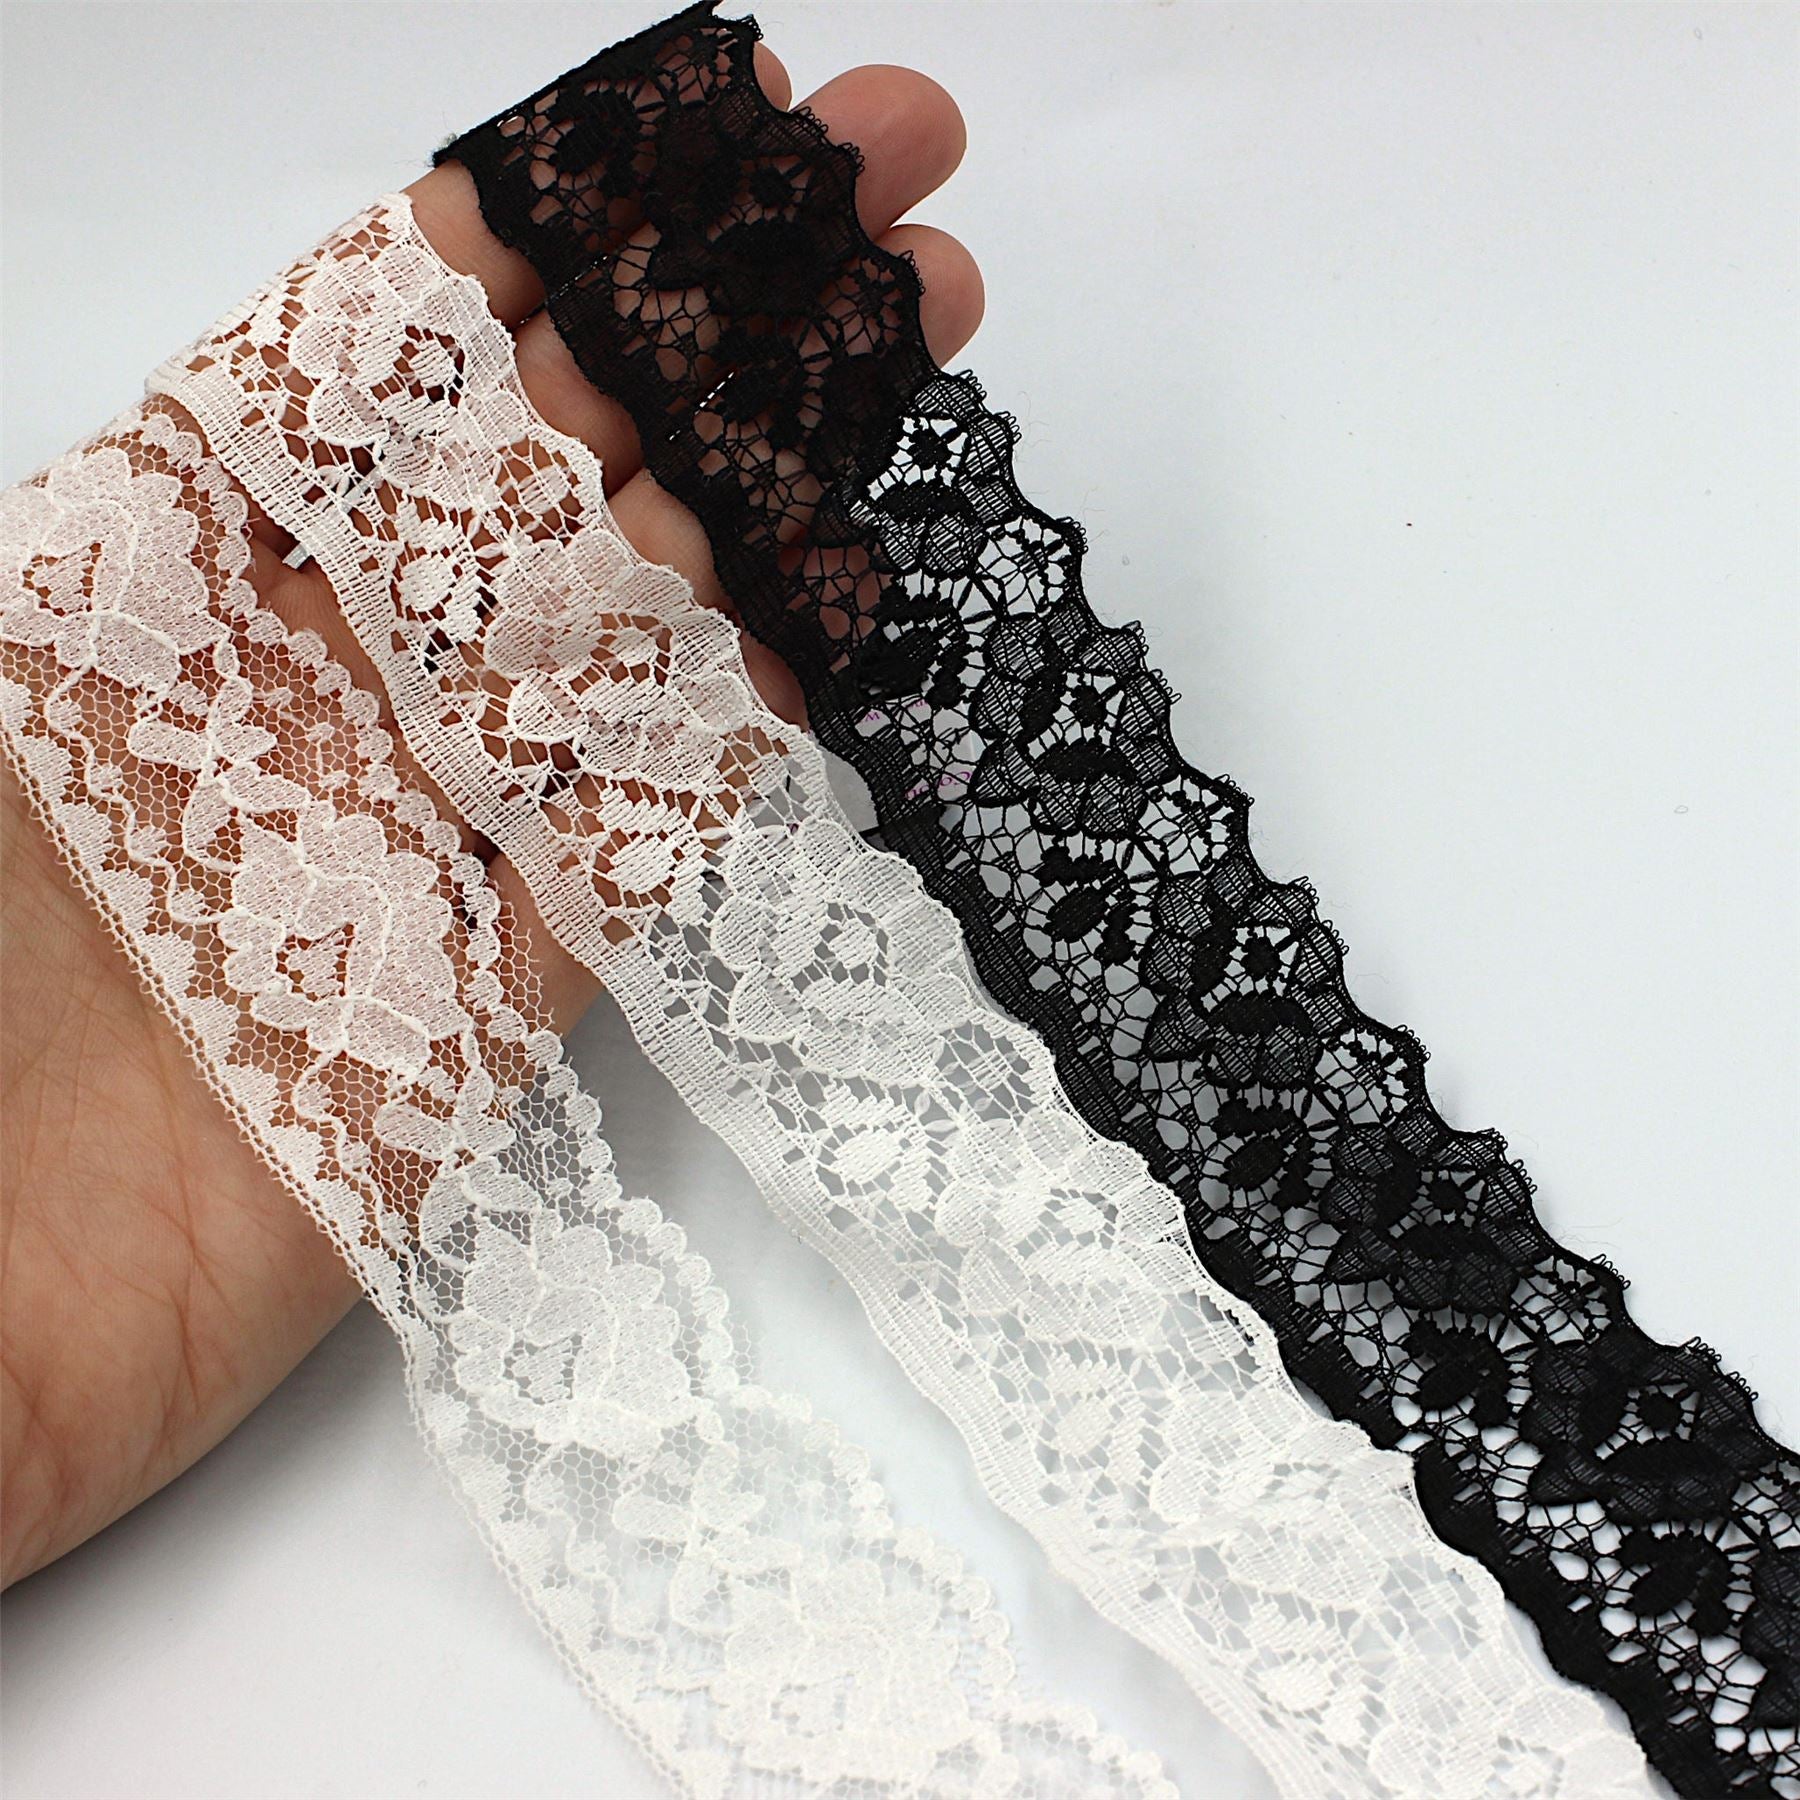 Cotton Lace With Woven Ribbon 30mm 6316 – Barnett Lawson Trimmings